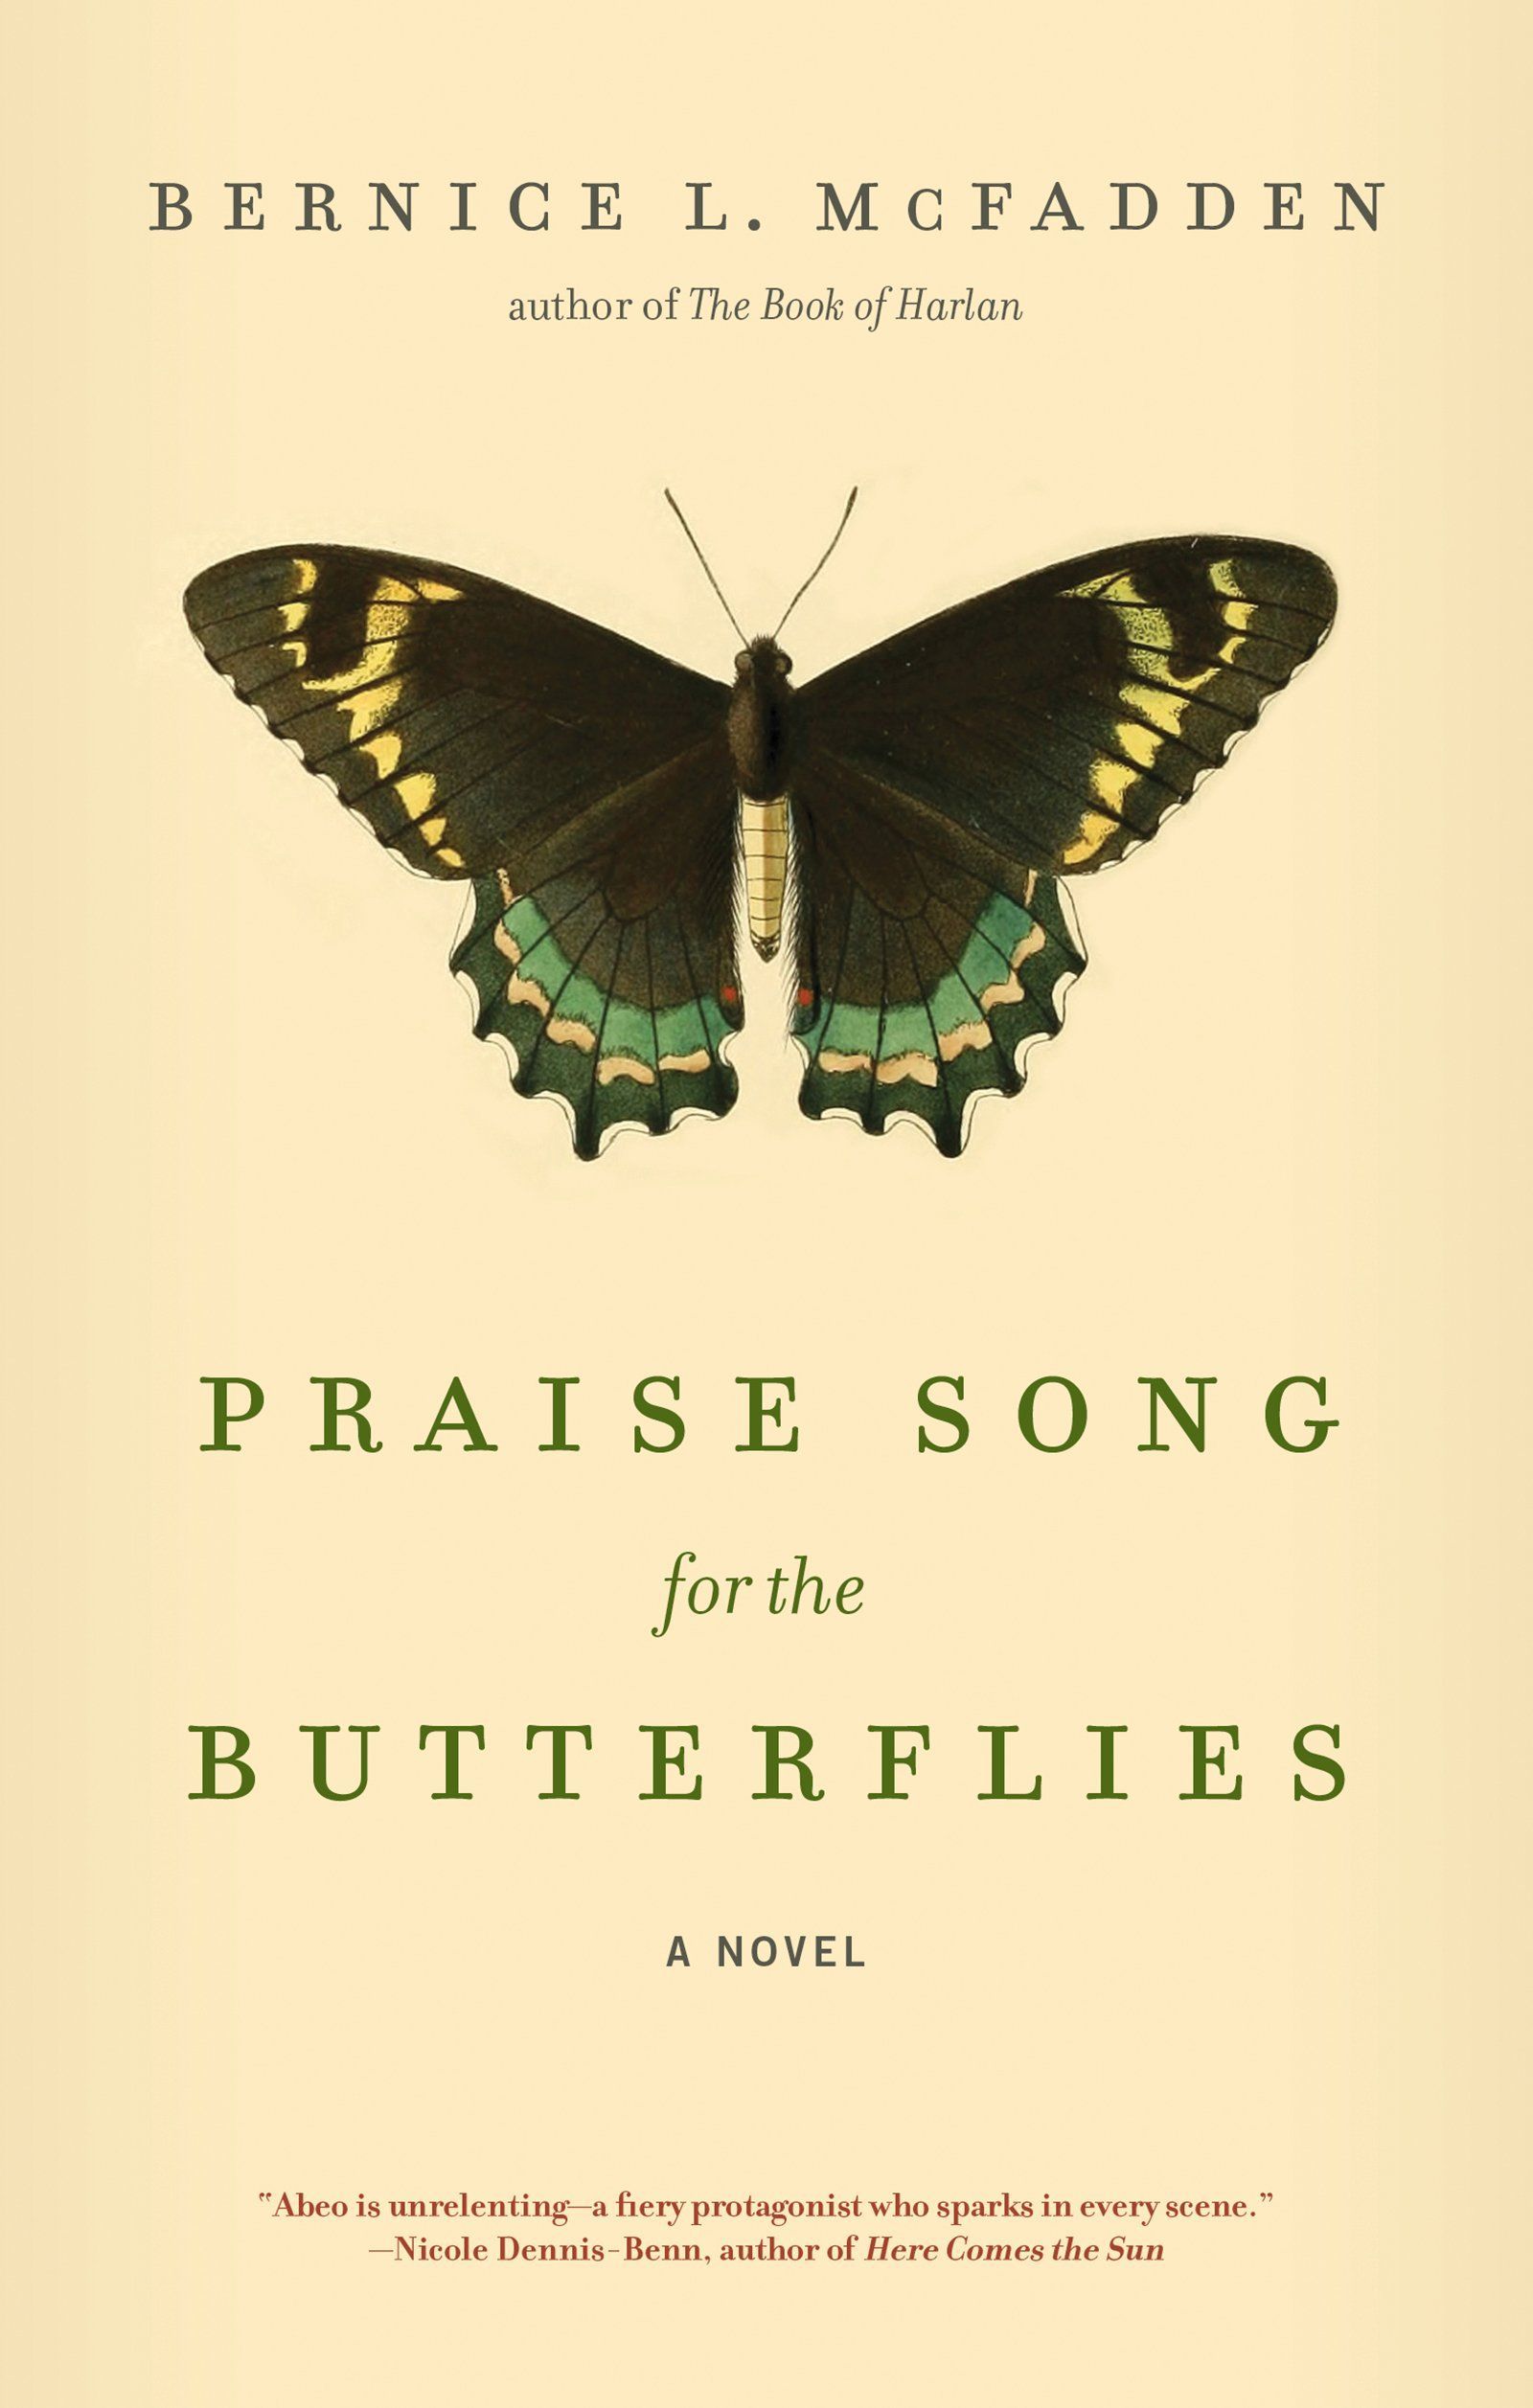 A Trokosi Mirror of the US-Mexican Border: On Bernice L. McFadden’s “Praise Song for the Butterflies”